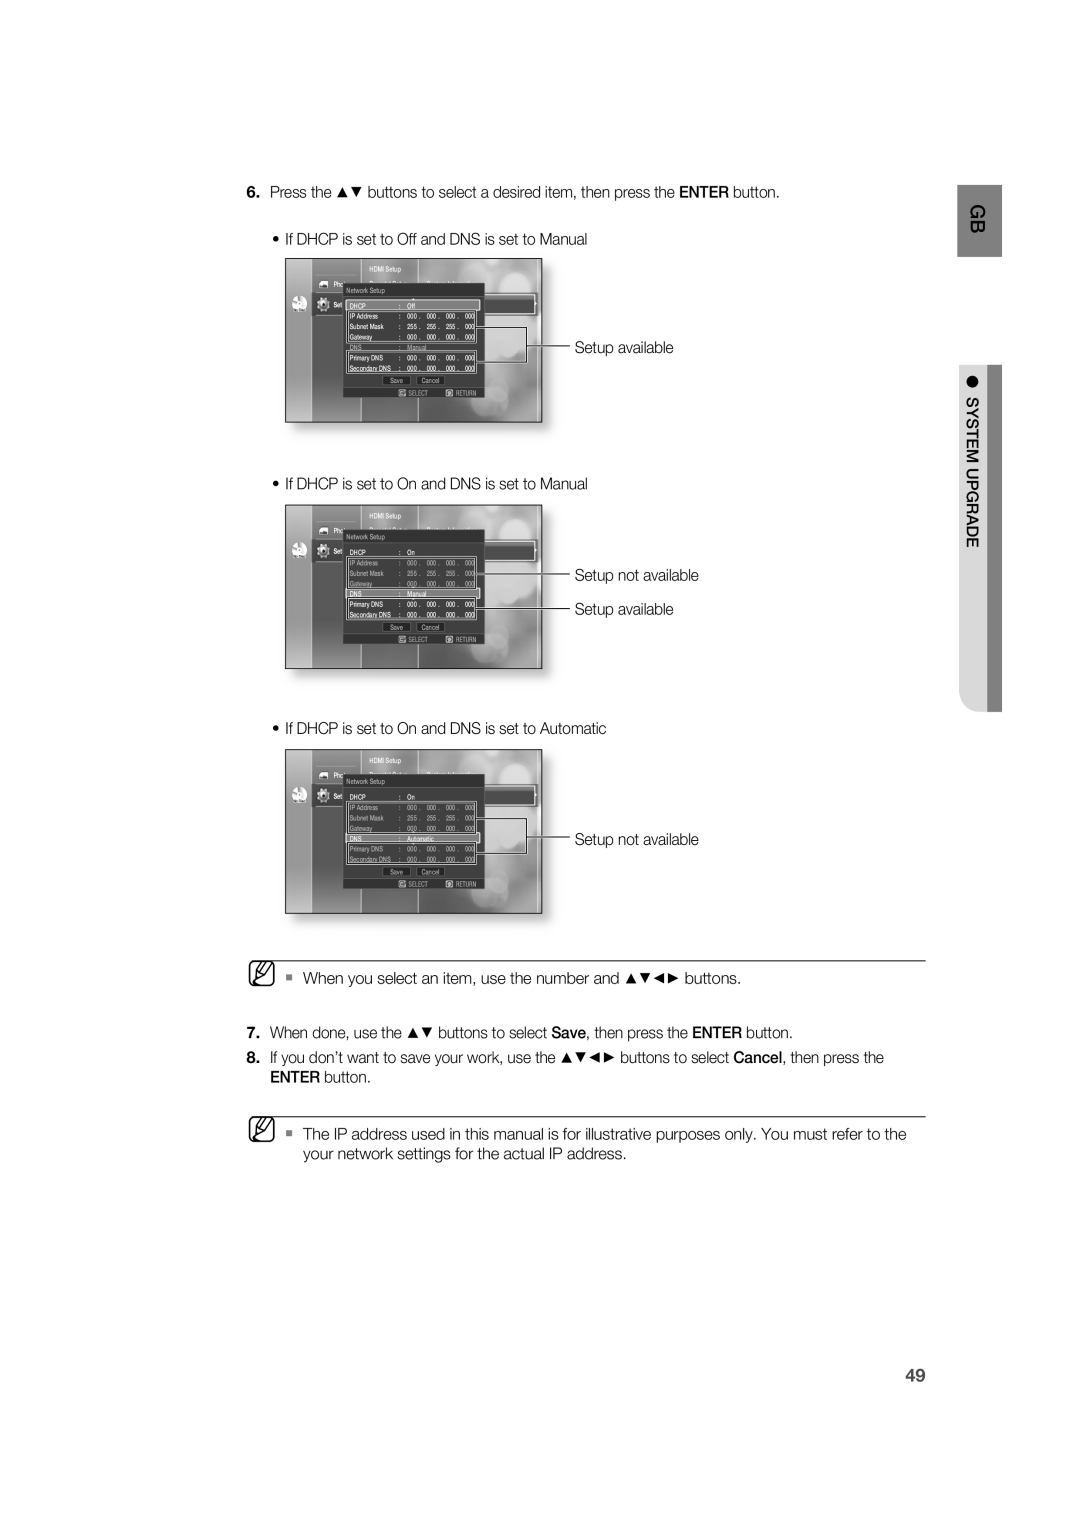 Samsung AH68-02019K manual •If DHCP is set to Off and DNS is set to Manual 